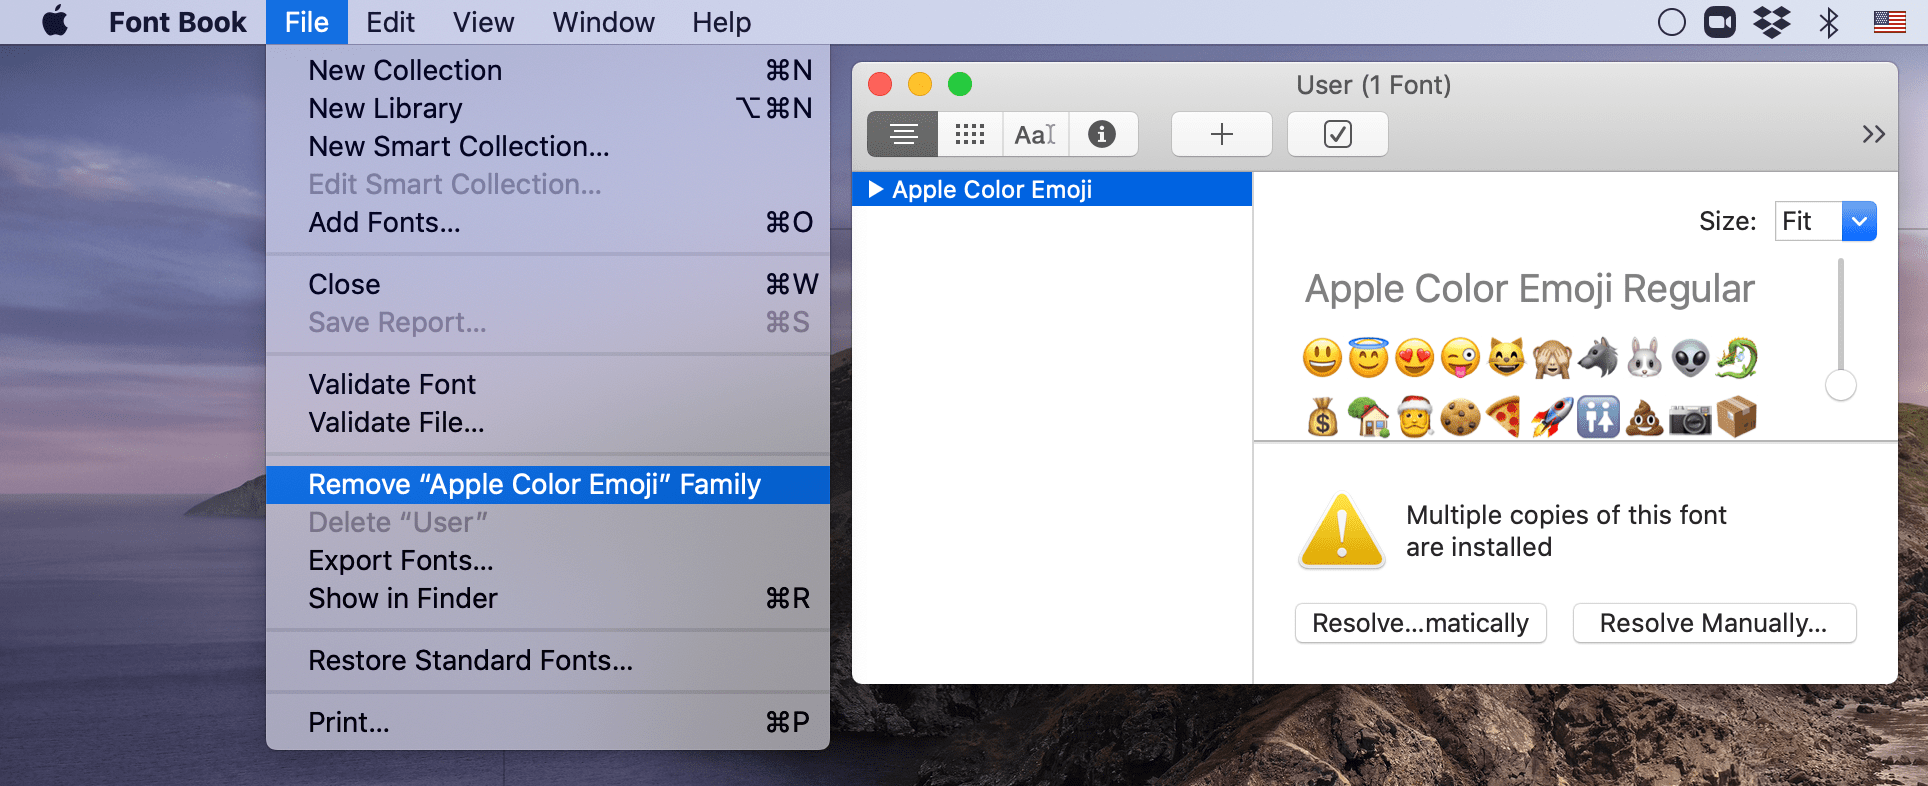 View Fonts For Mac